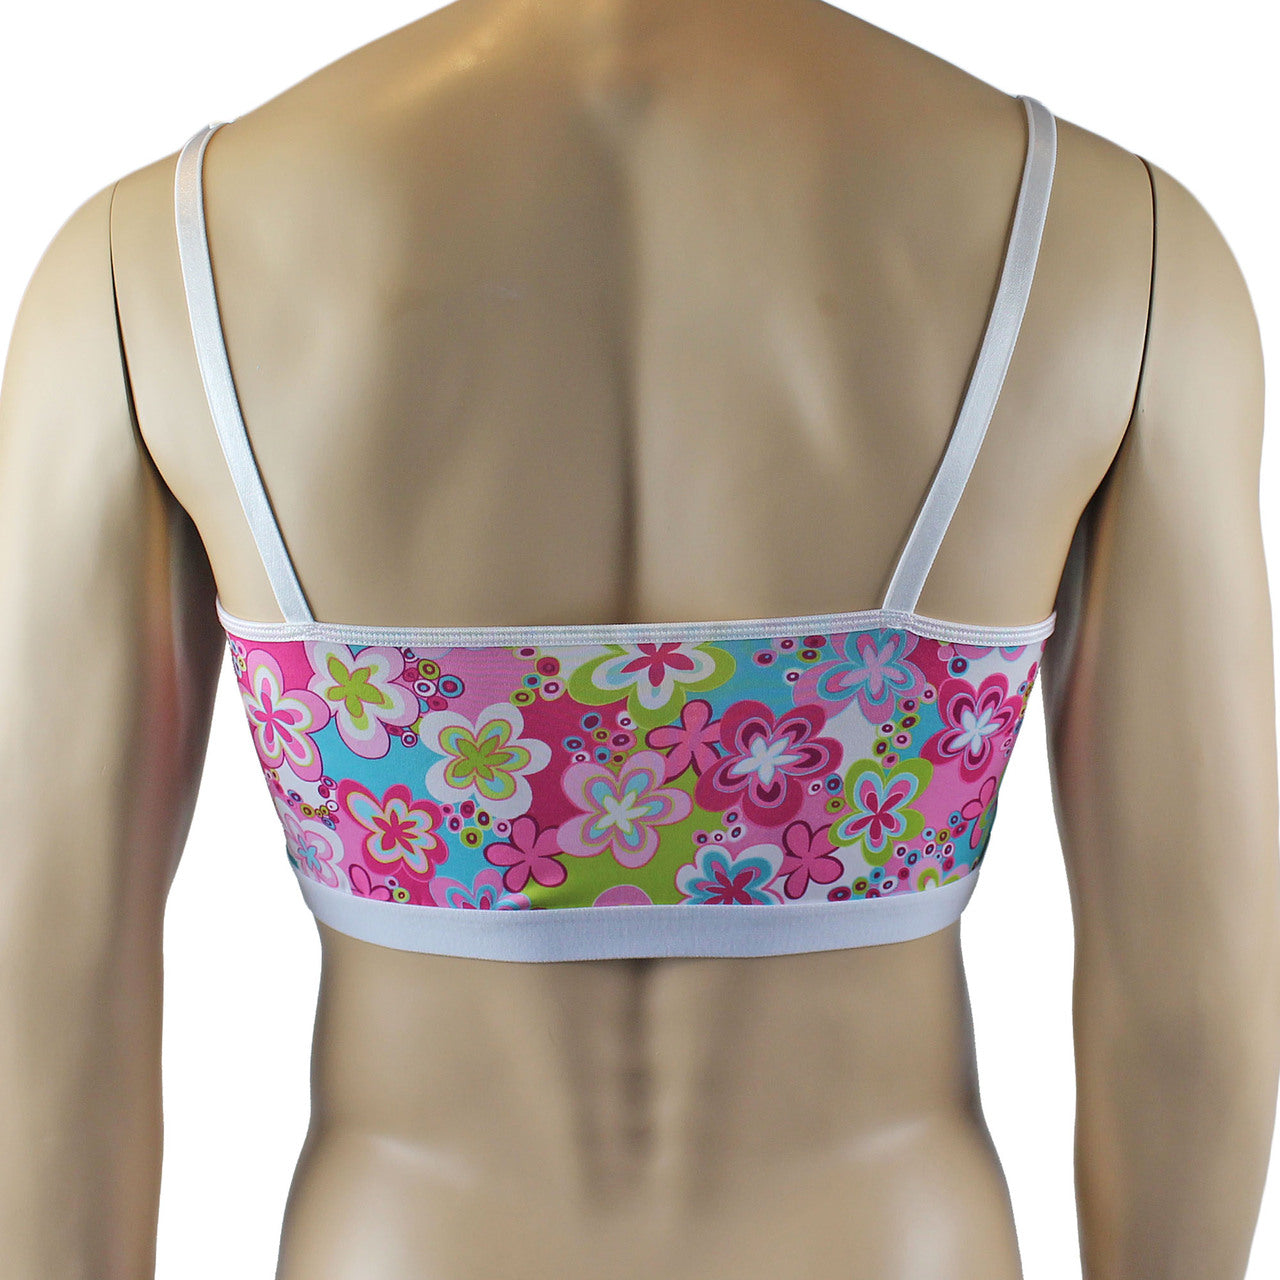 Male Hippie Flower Print Crop Top Camisole with Band